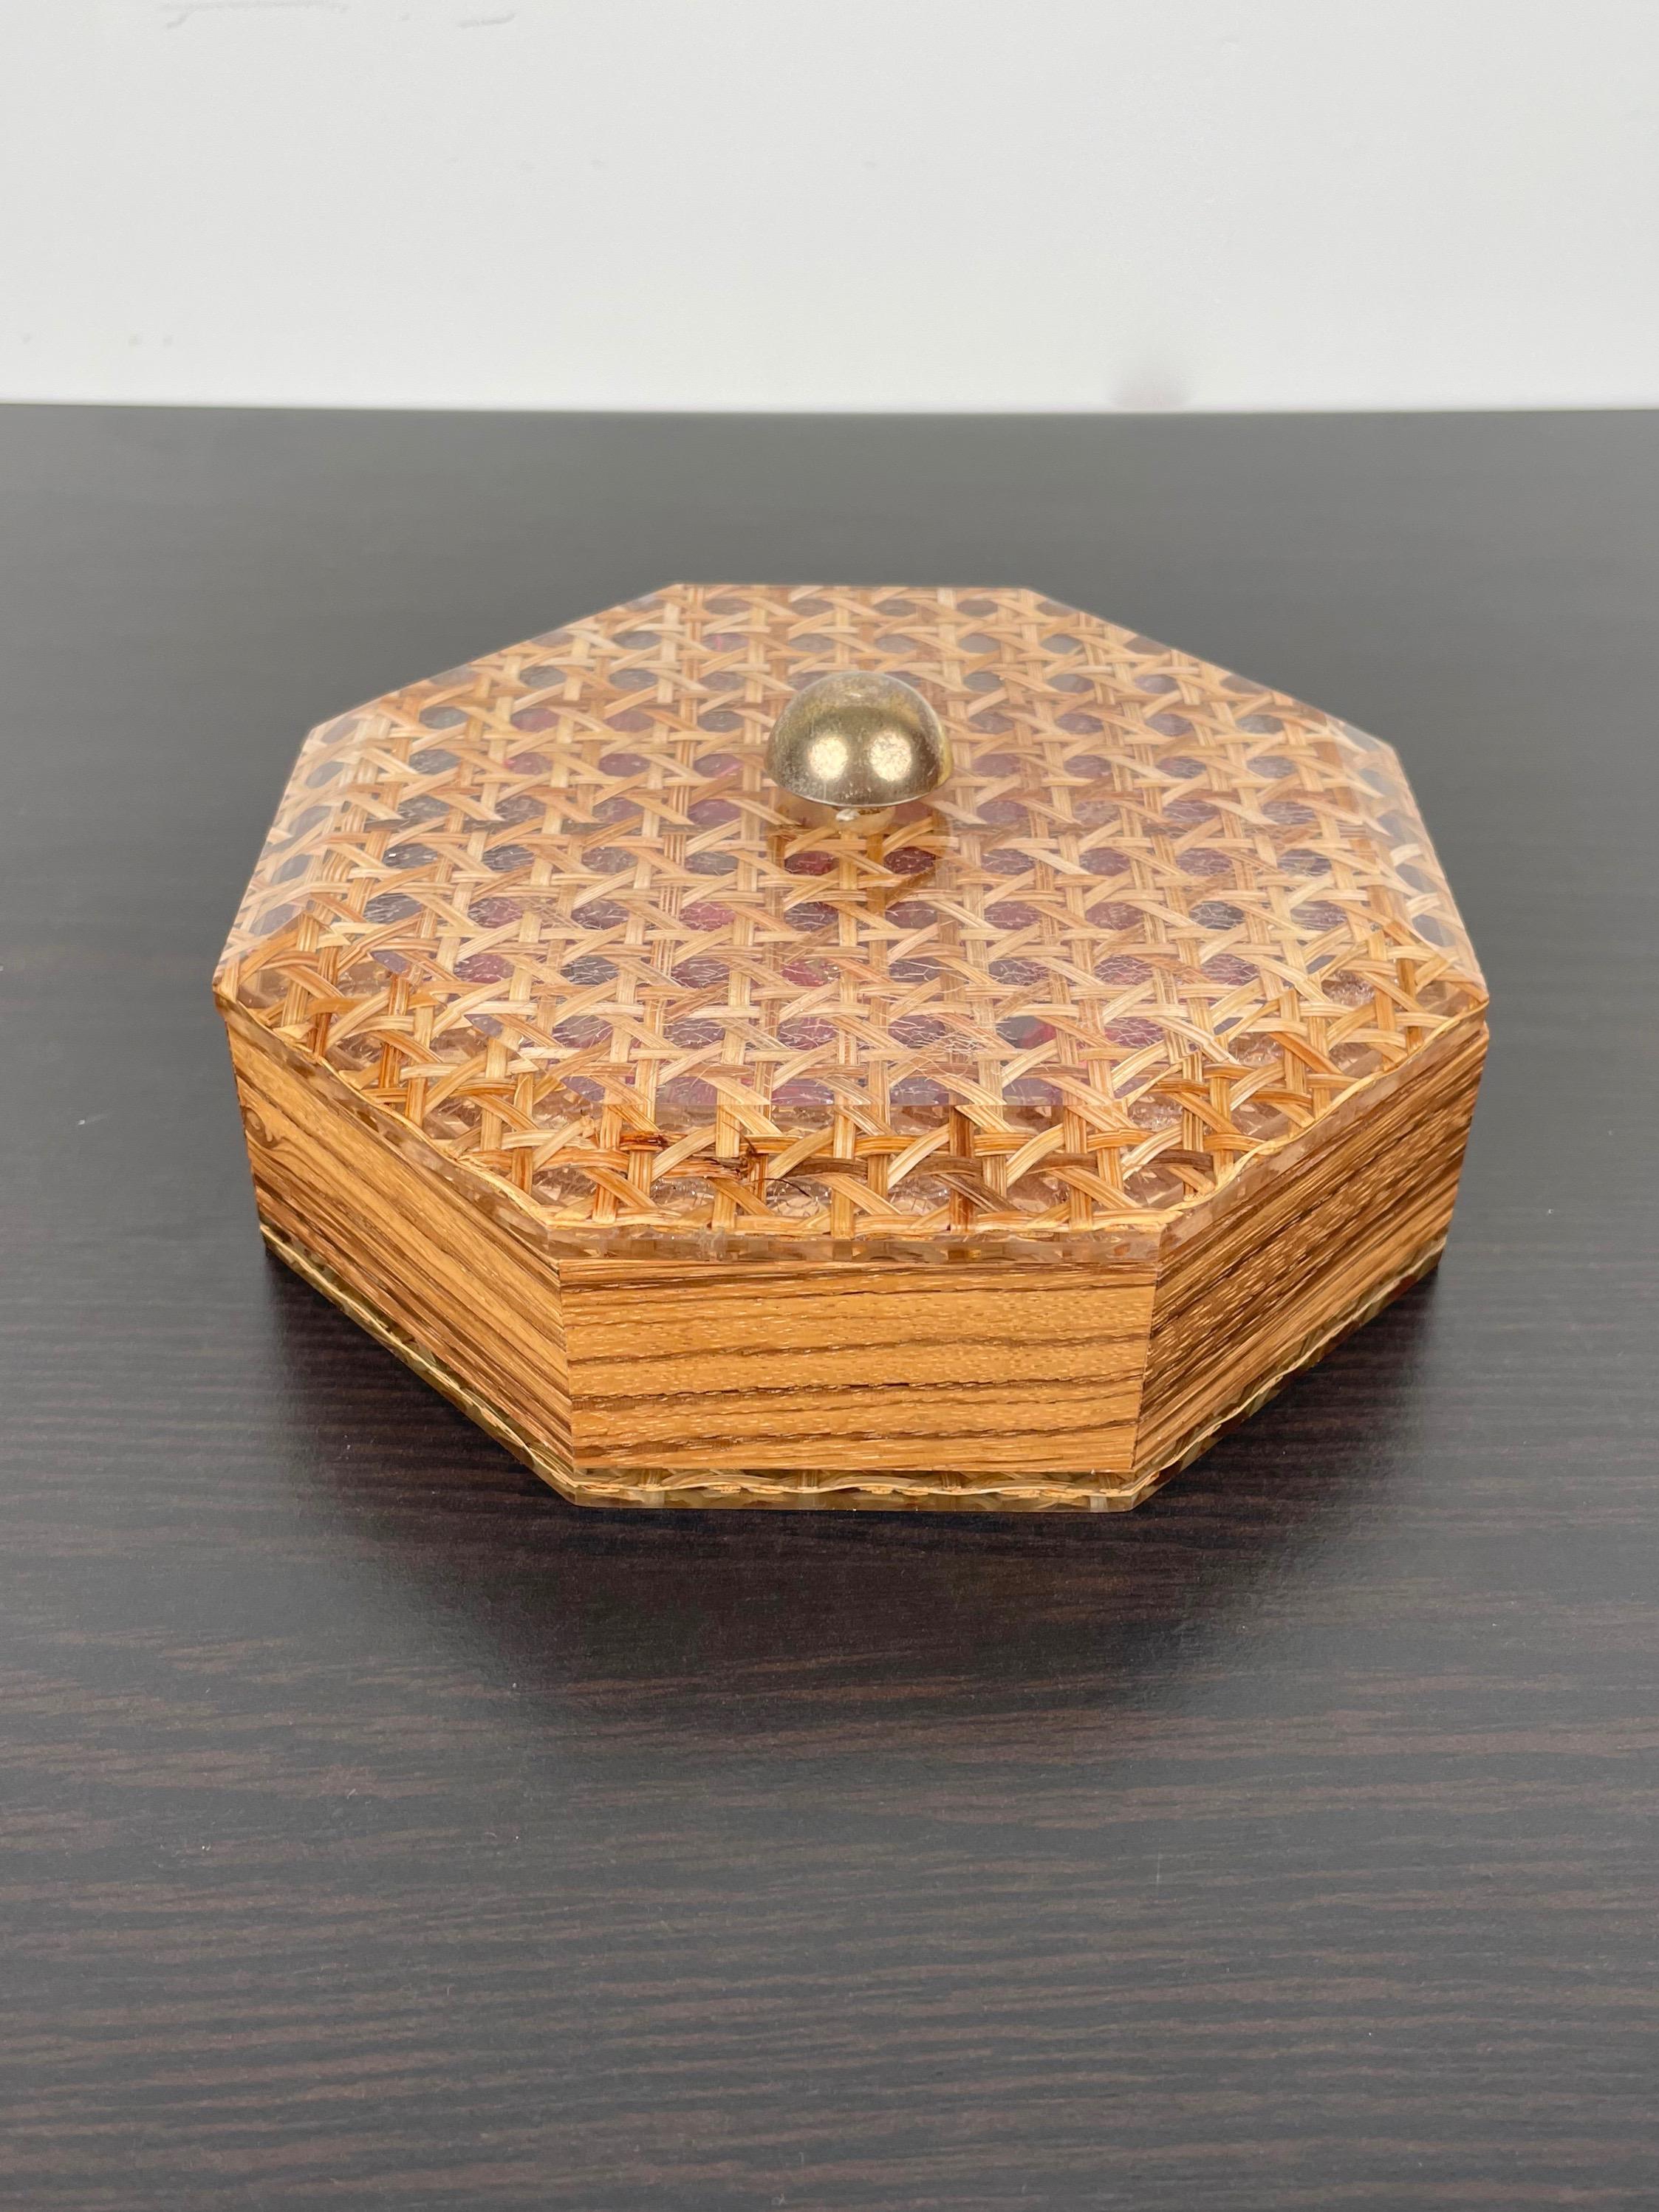 Octagonal box in Lucite, wicker and wood with a brass knob in Christian Dior style. Made in France in the 1970s.